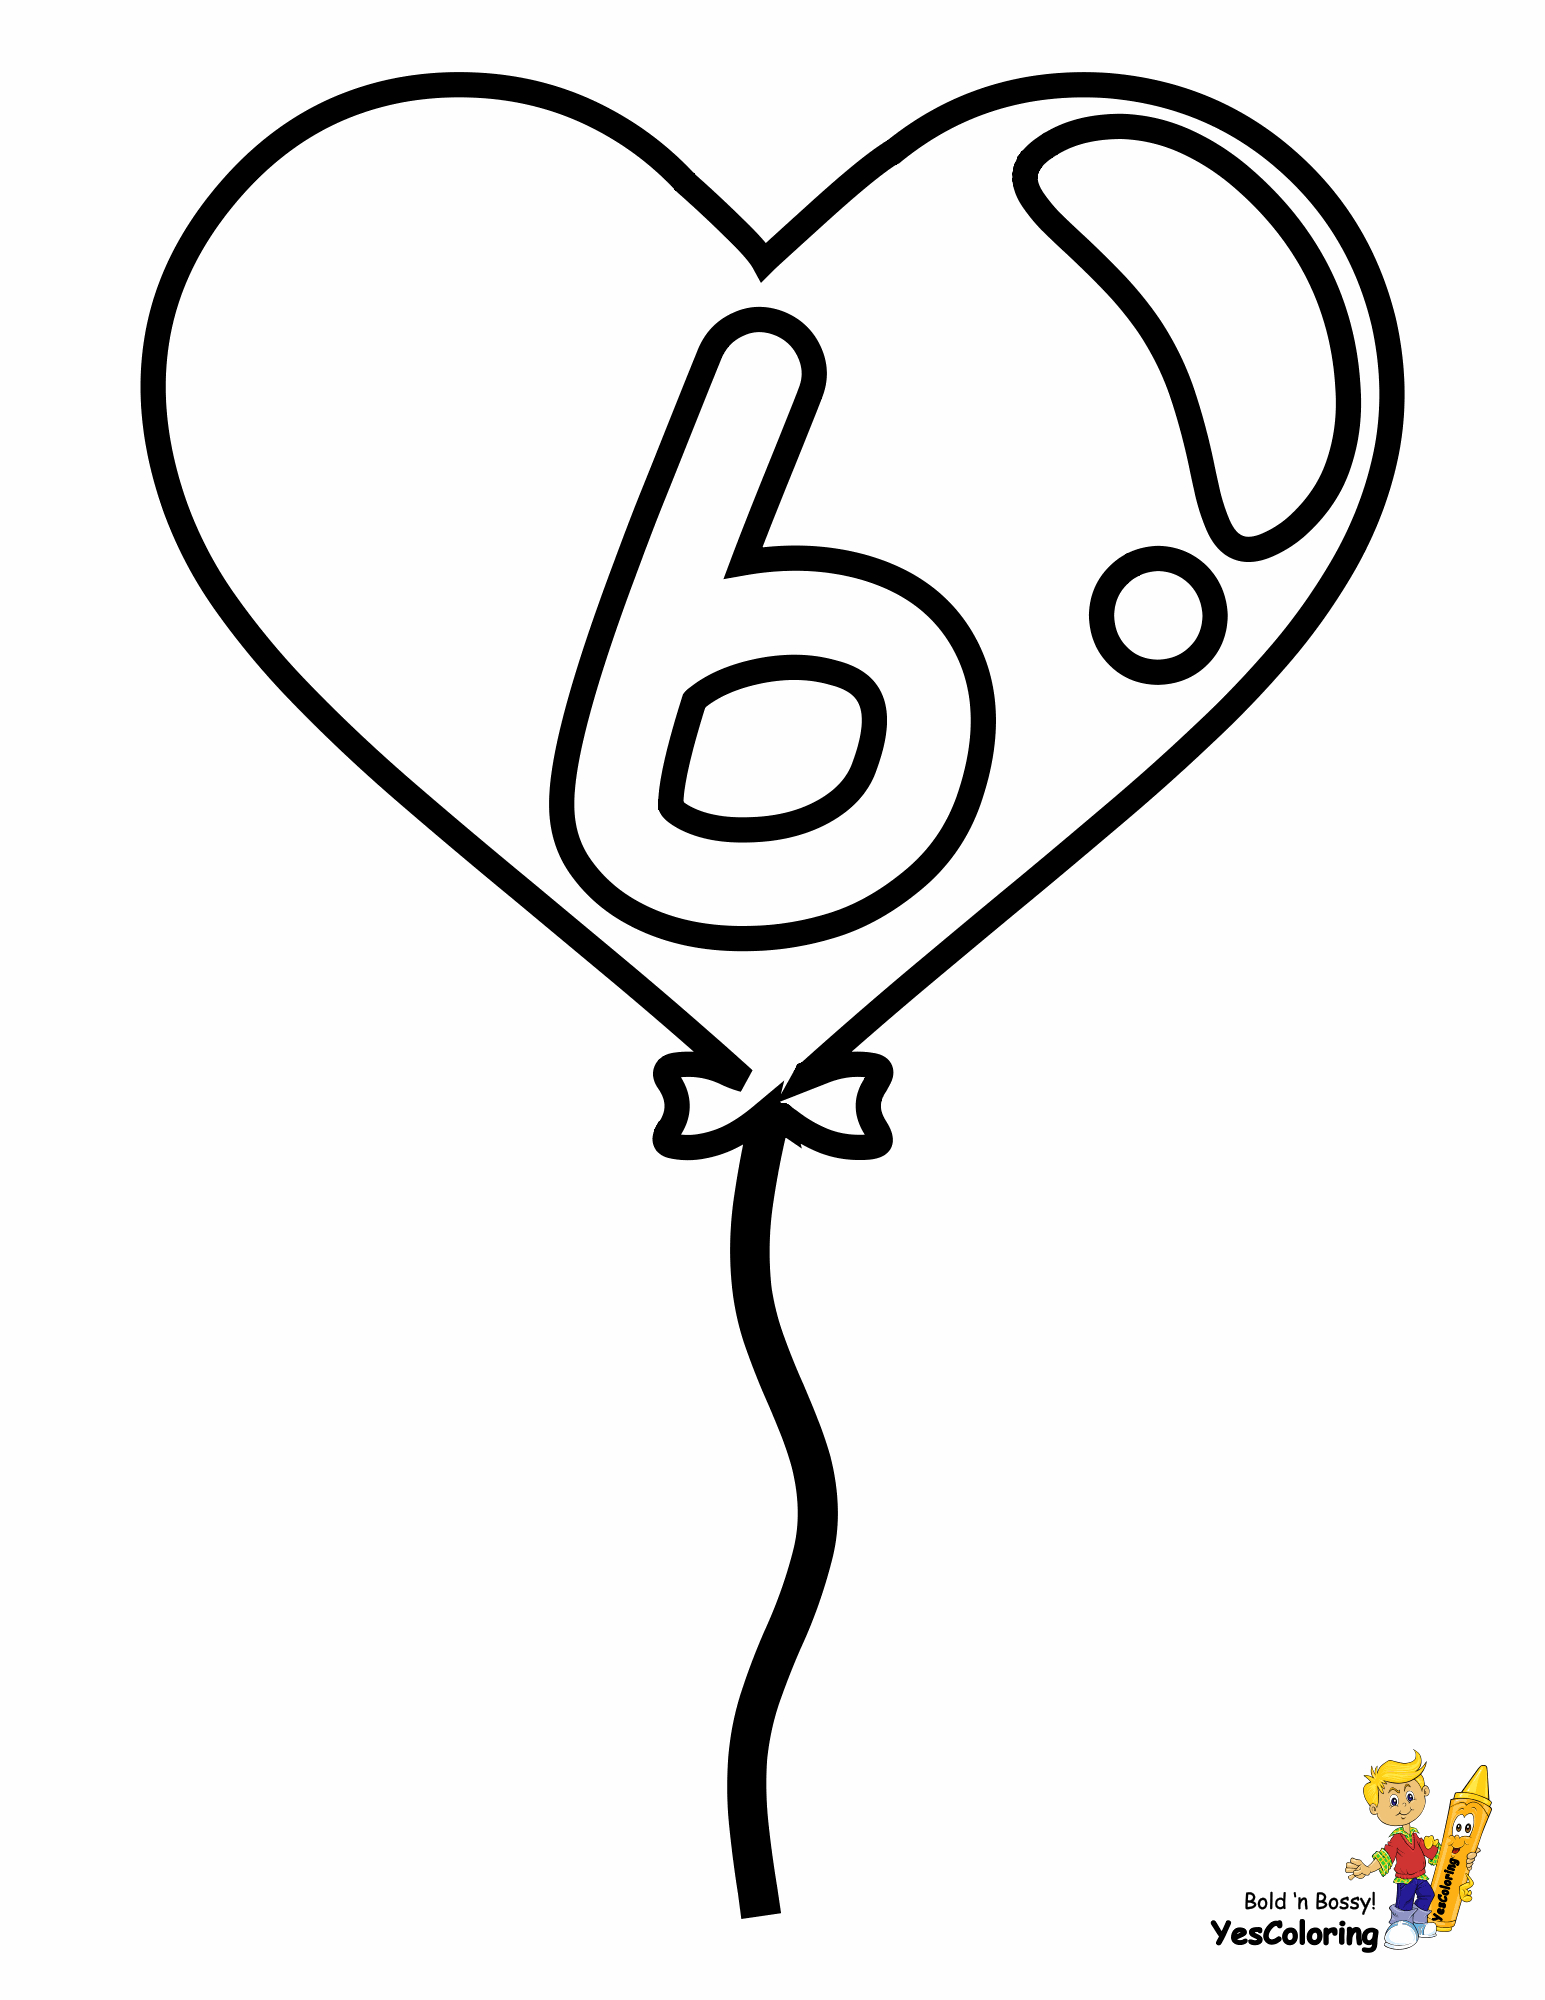 Number 6 Coloring Page Fun Valentines Easy Coloring Pages Alphabets Balloons